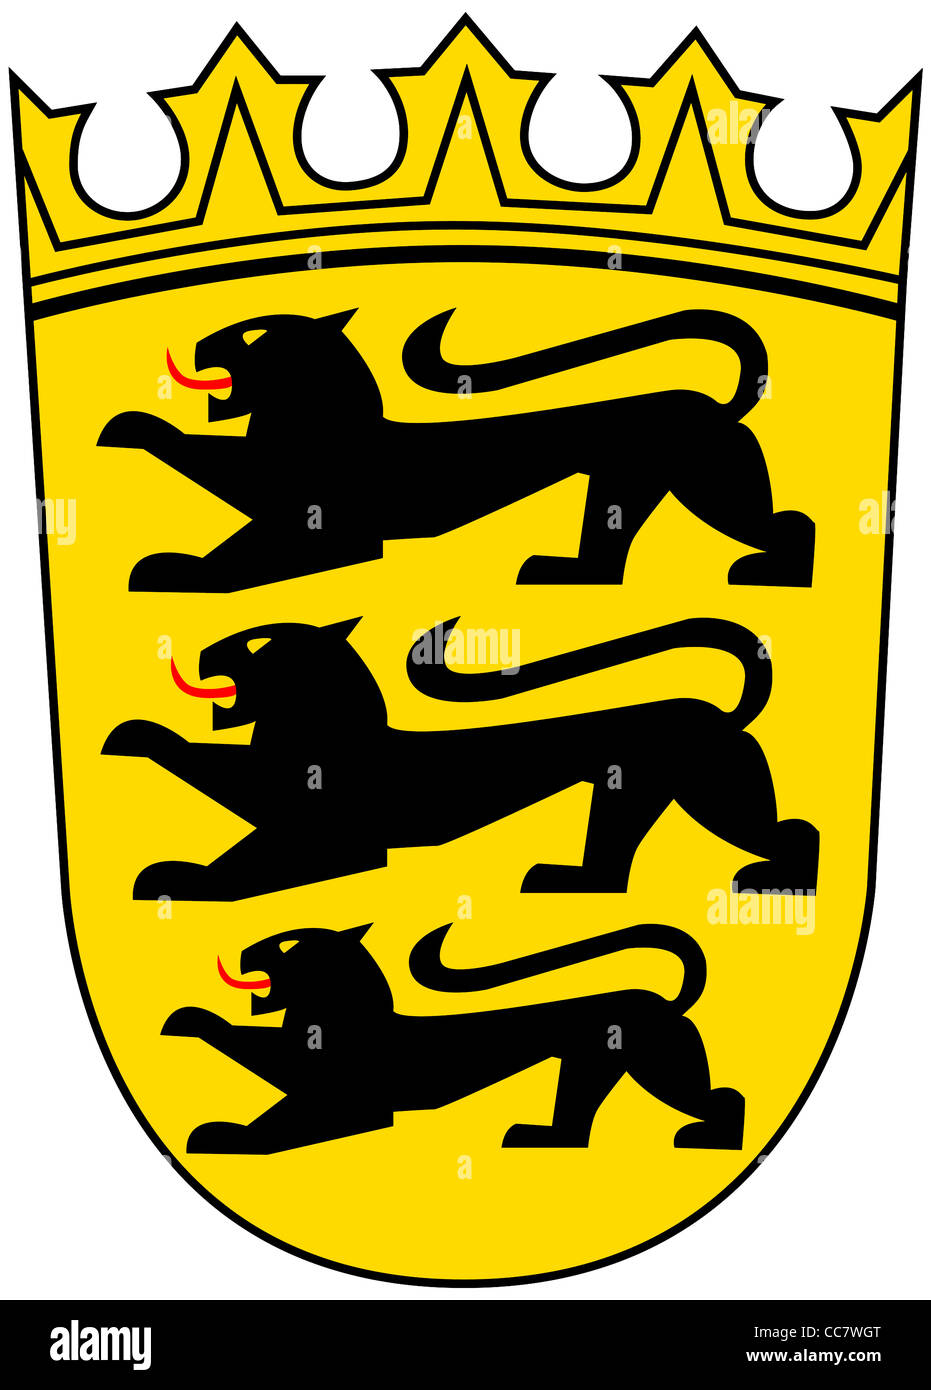 Coat of arms of the German federal state Baden Wurttemberg. Stock Photo